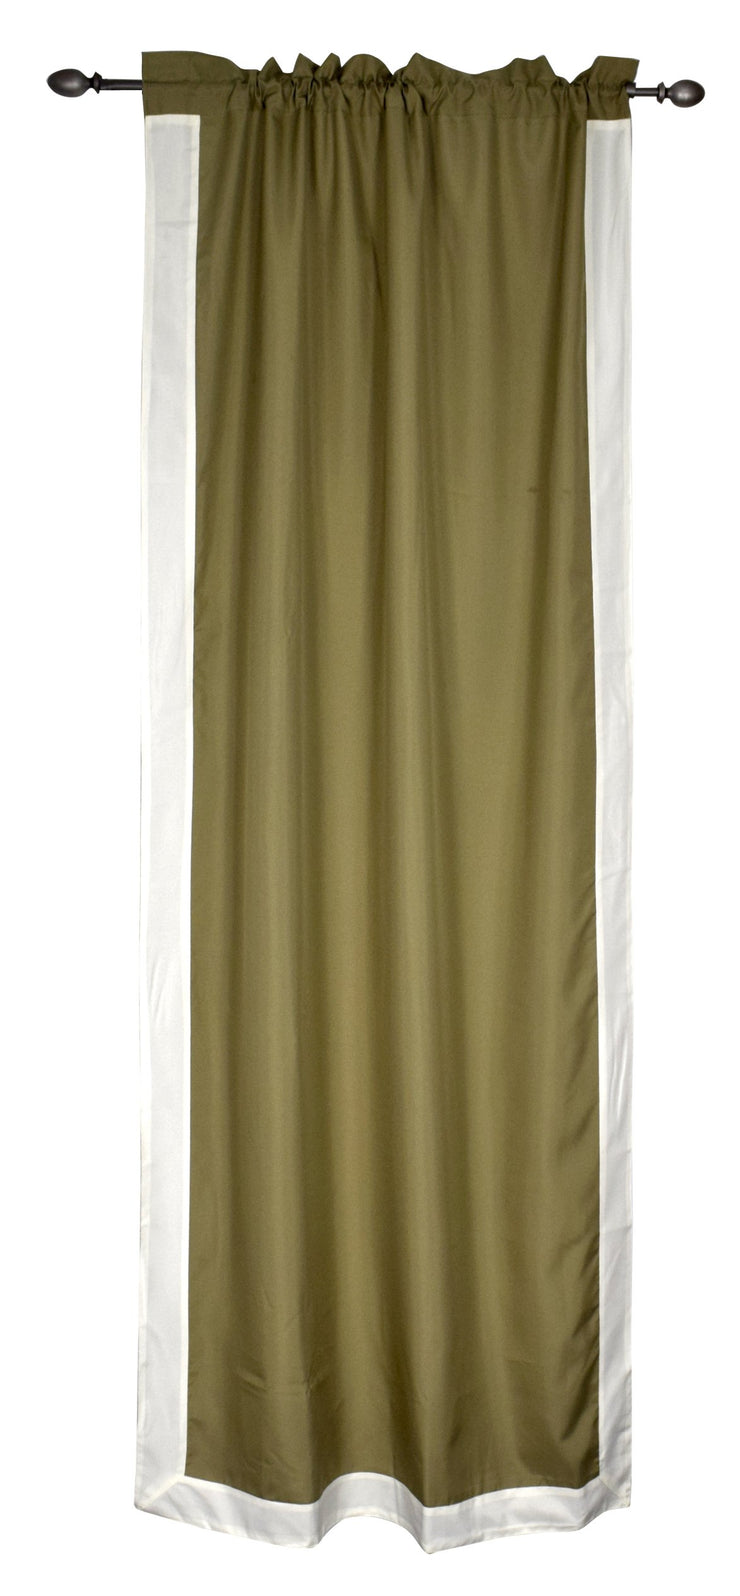 Peach Couture Two Tone Decorative Royal Gramercy Panels Curtains